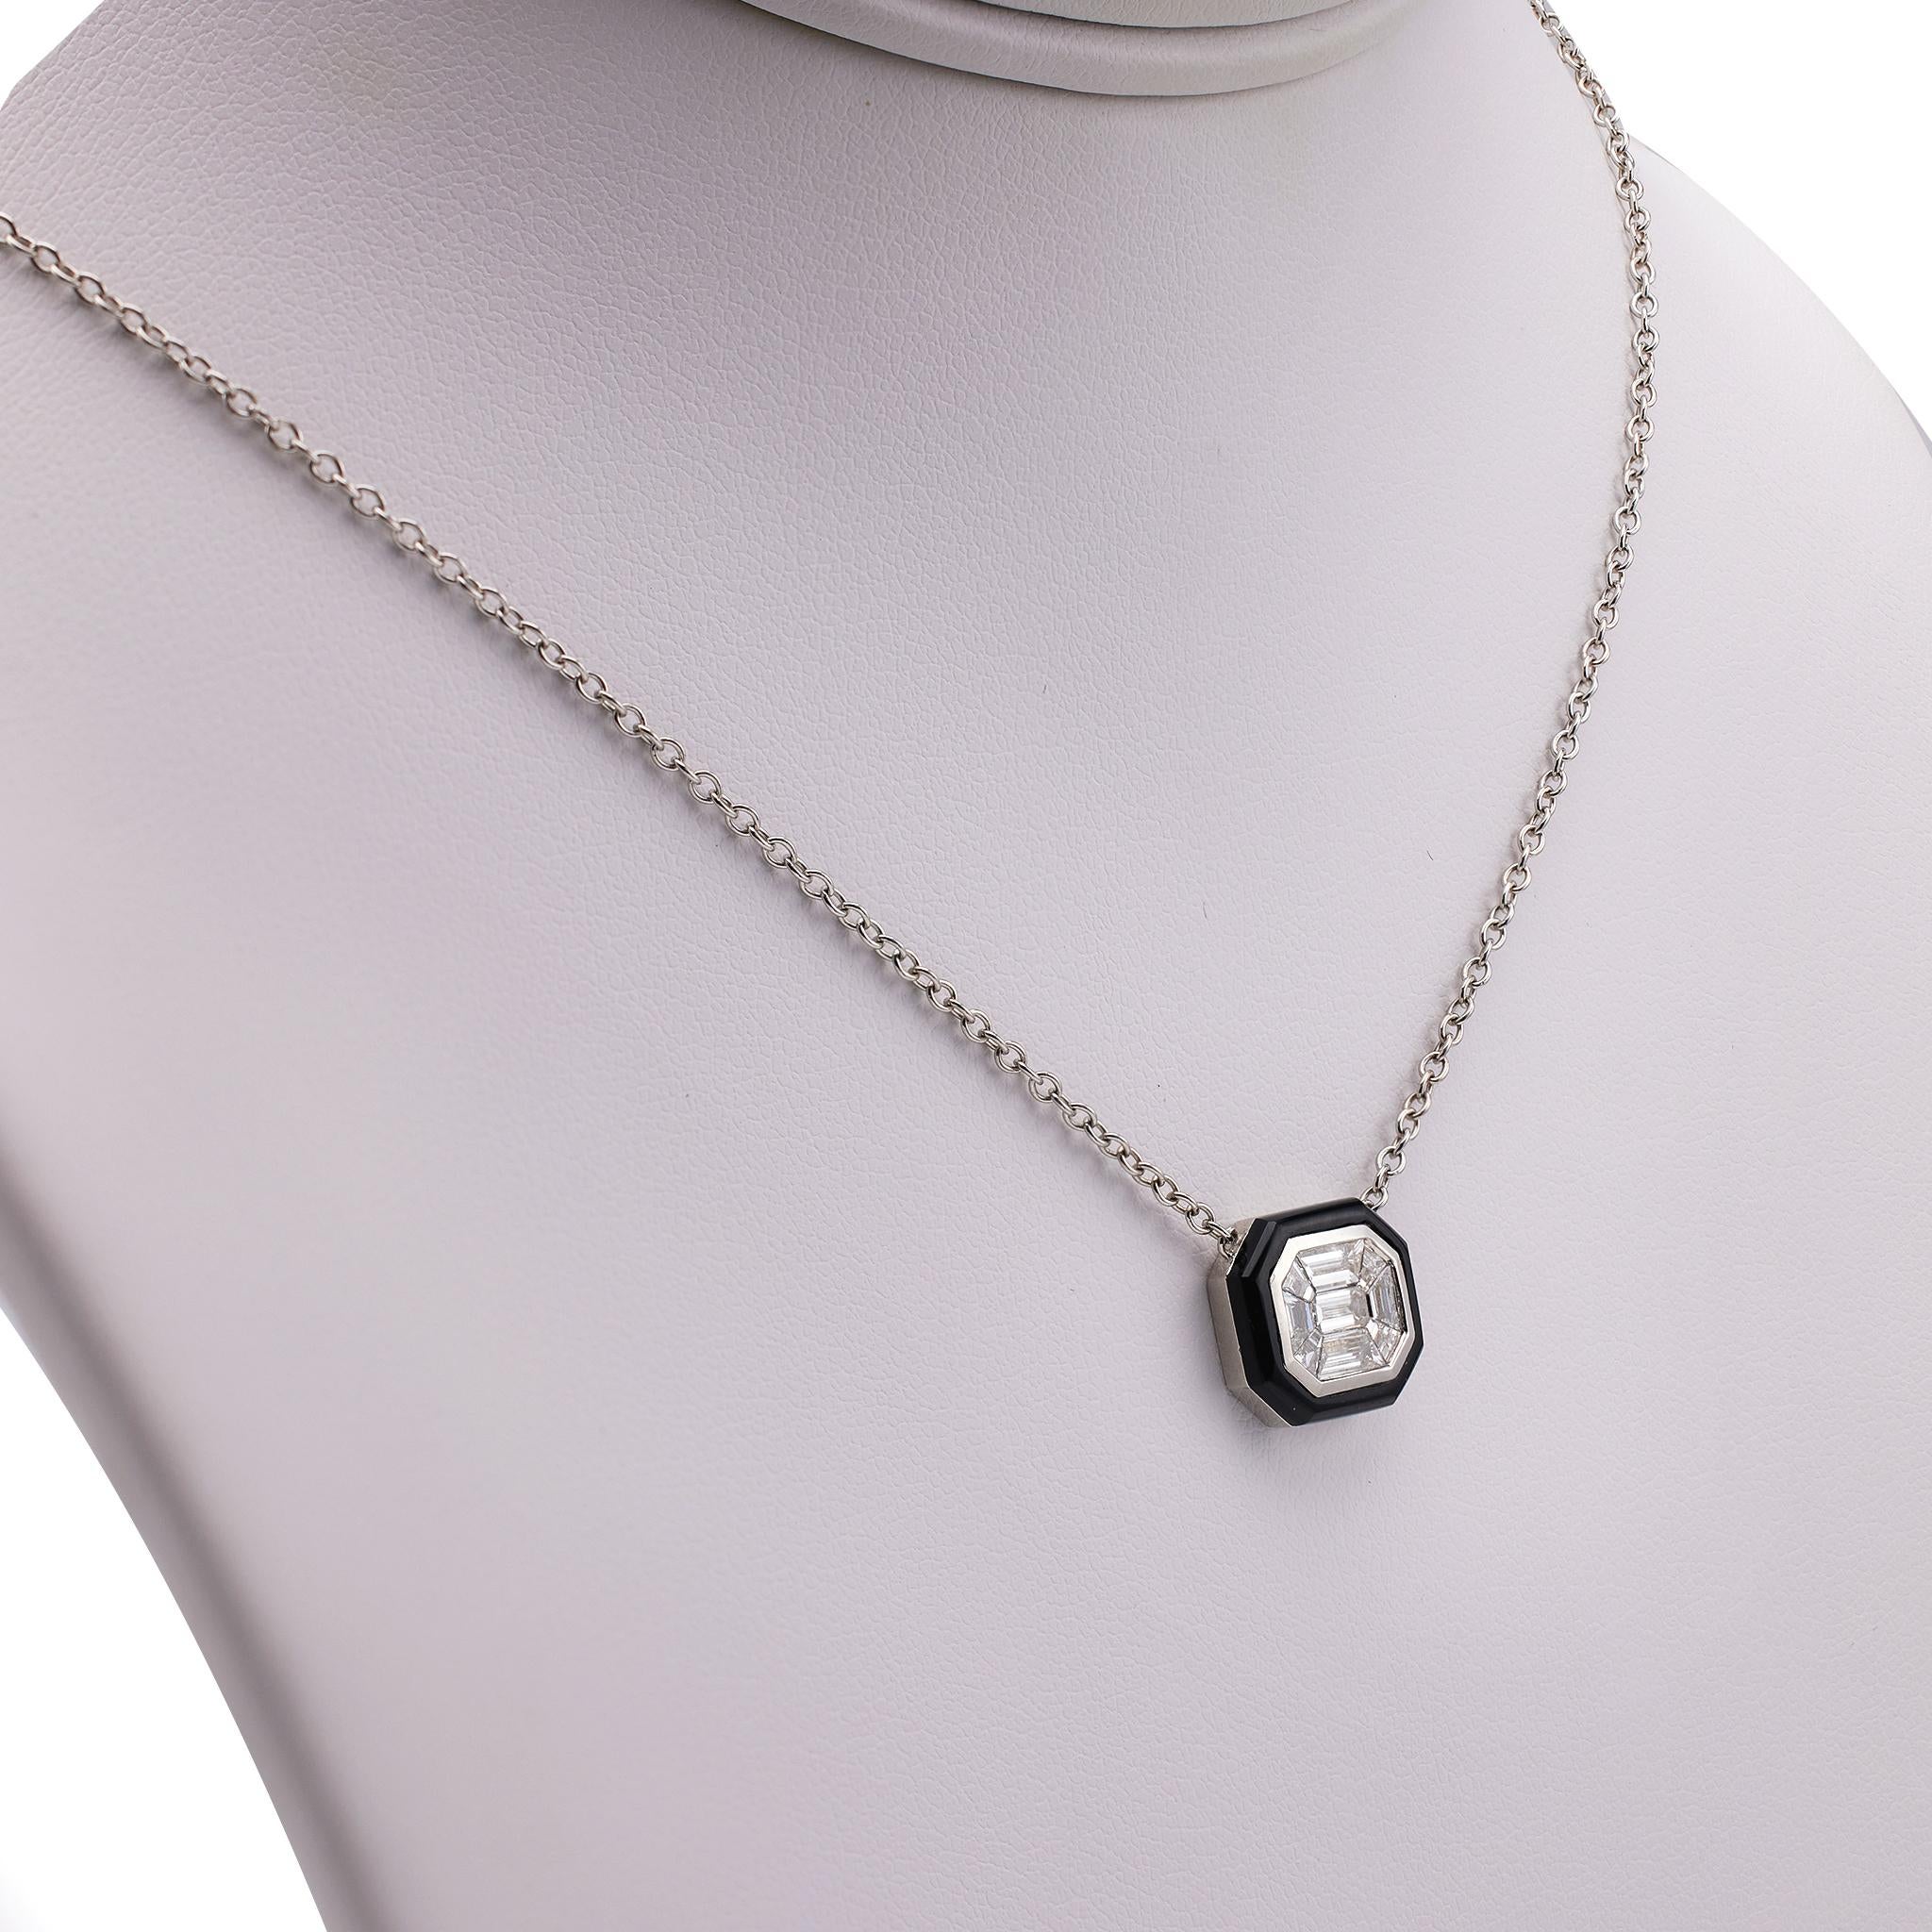 Women's or Men's 0.63 Carat Total Weight Diamond Onyx 18k White Gold Pendant Necklace For Sale